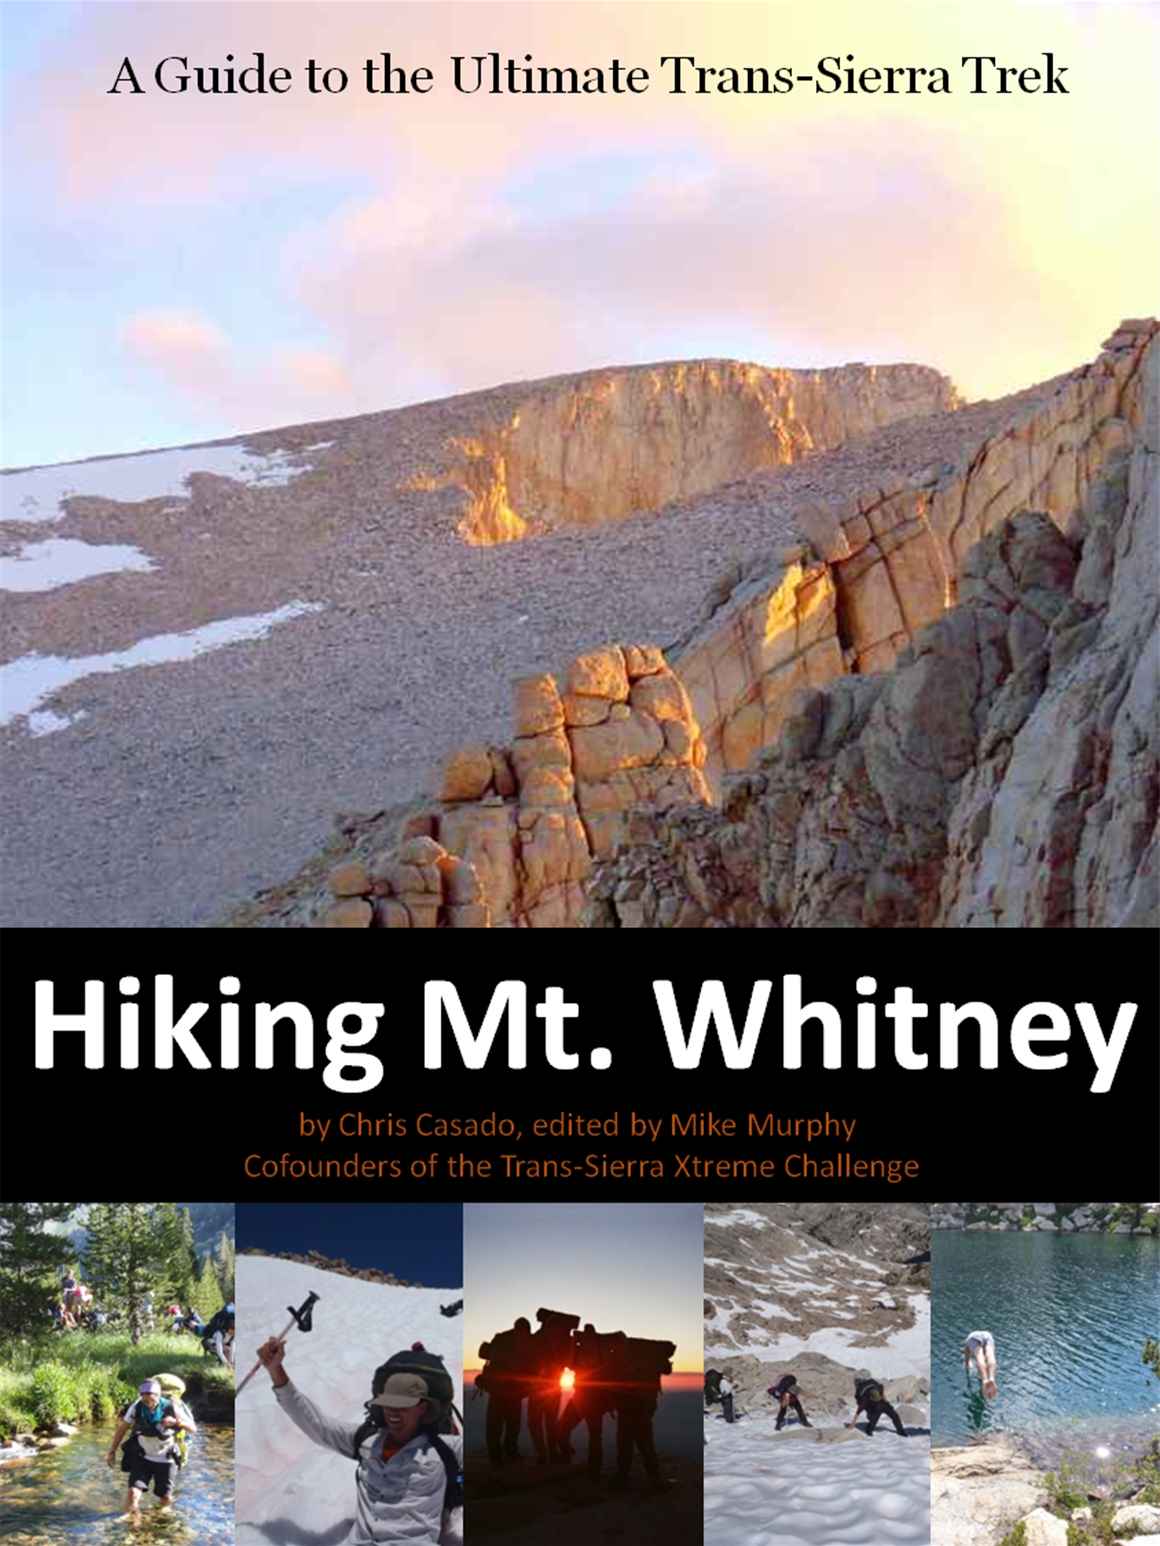 Hiking Mt. Whitney, a Guide to the Ultimate Trans-Sierra Trek